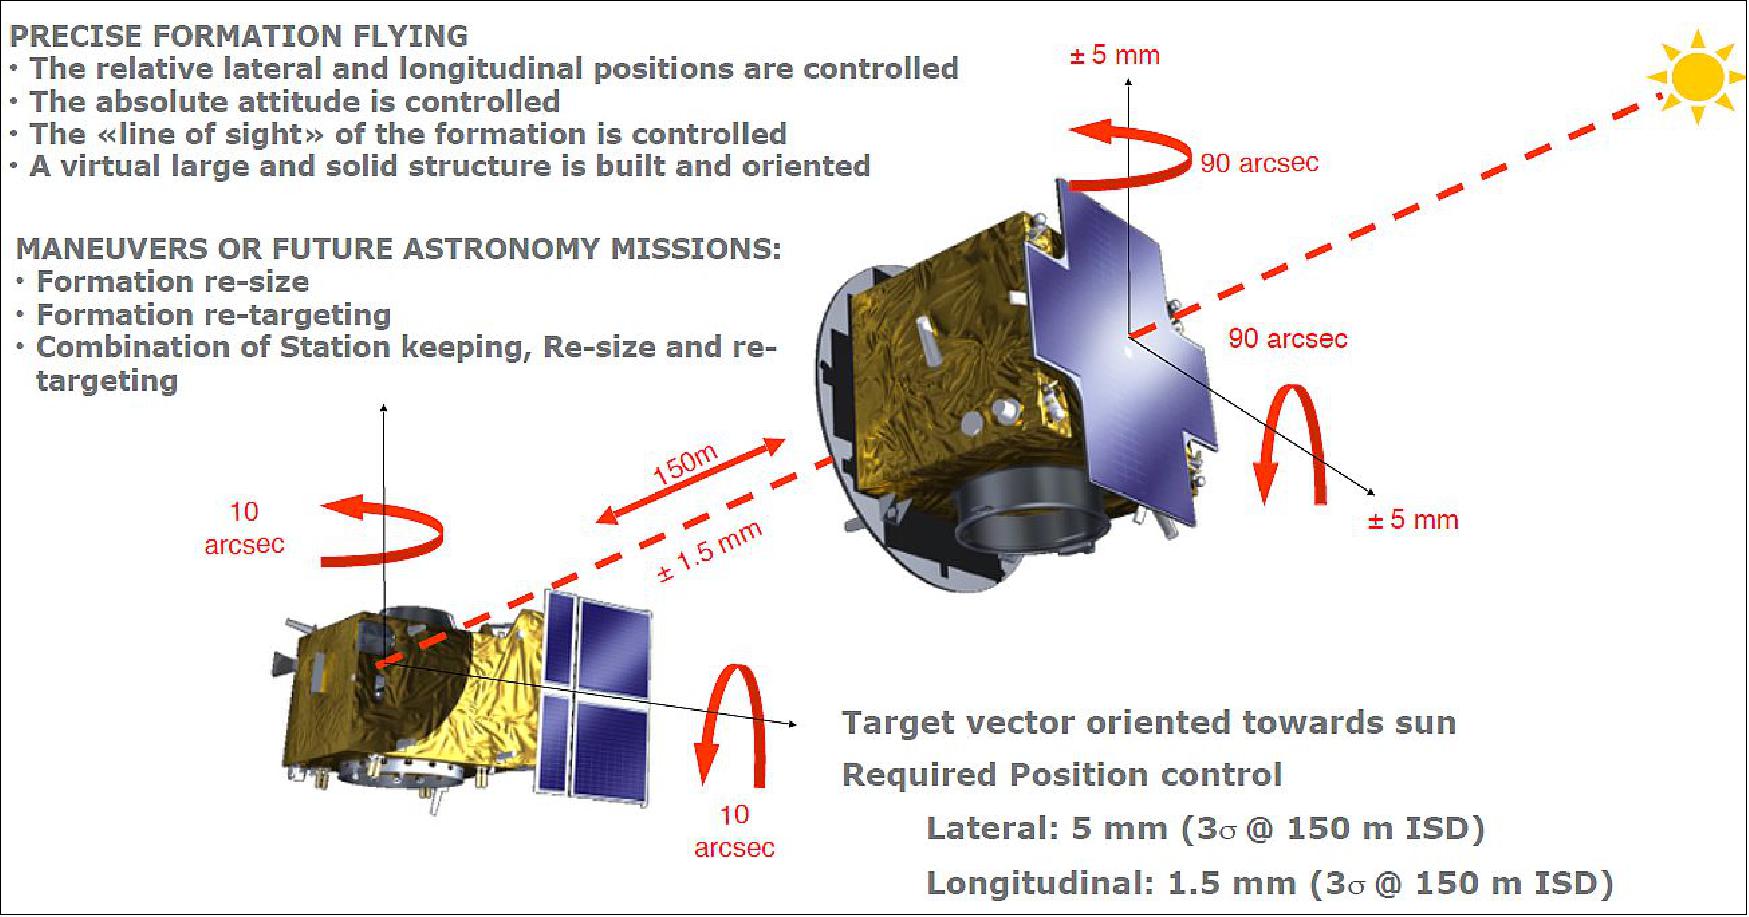 Figure 32: Precise formation flying of PROBA-3 (image credit: ESA, D. Galano)